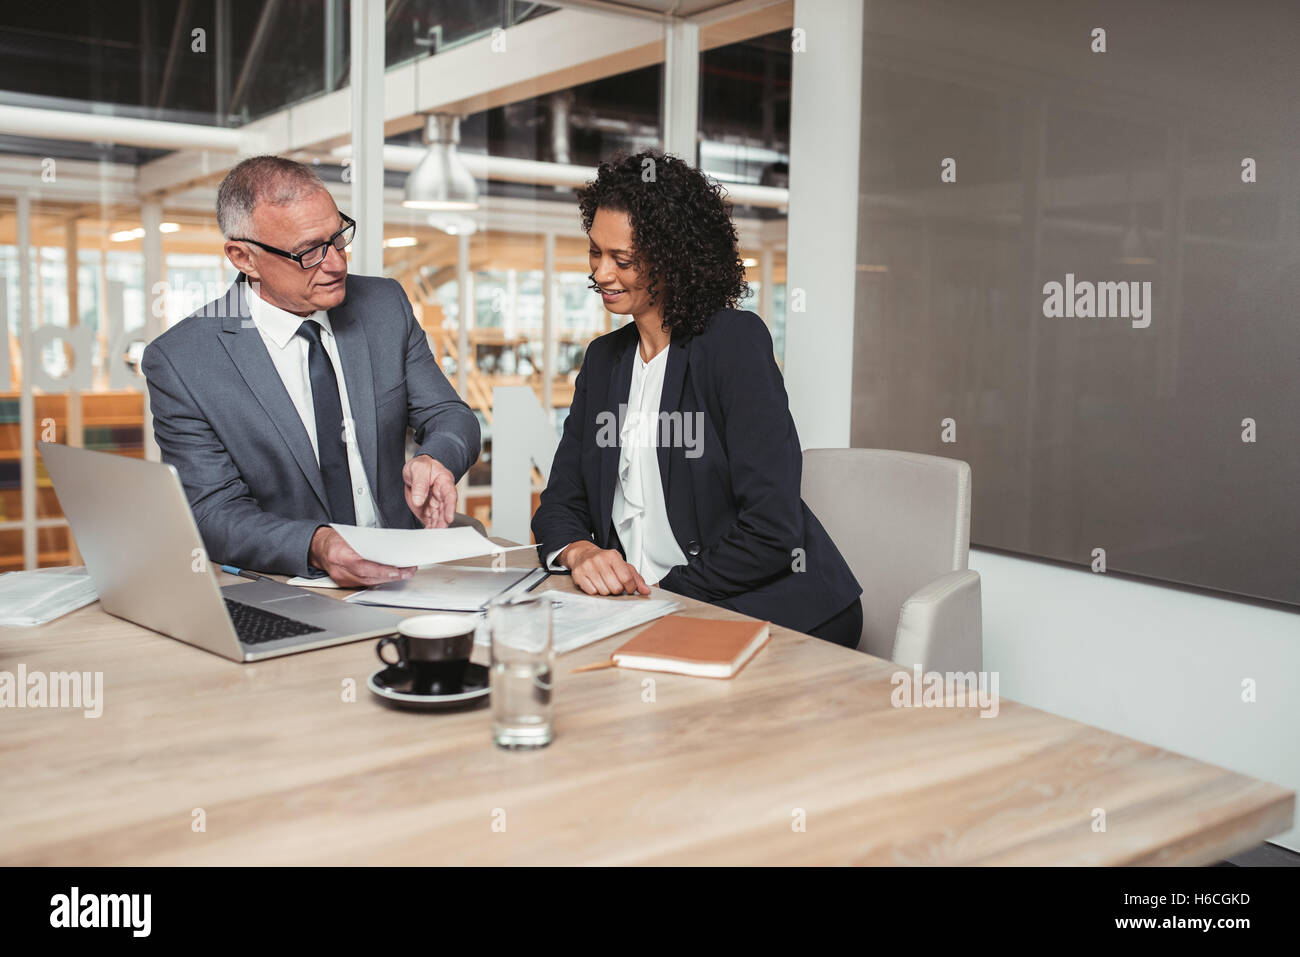 Explaining the finer points of business Stock Photo